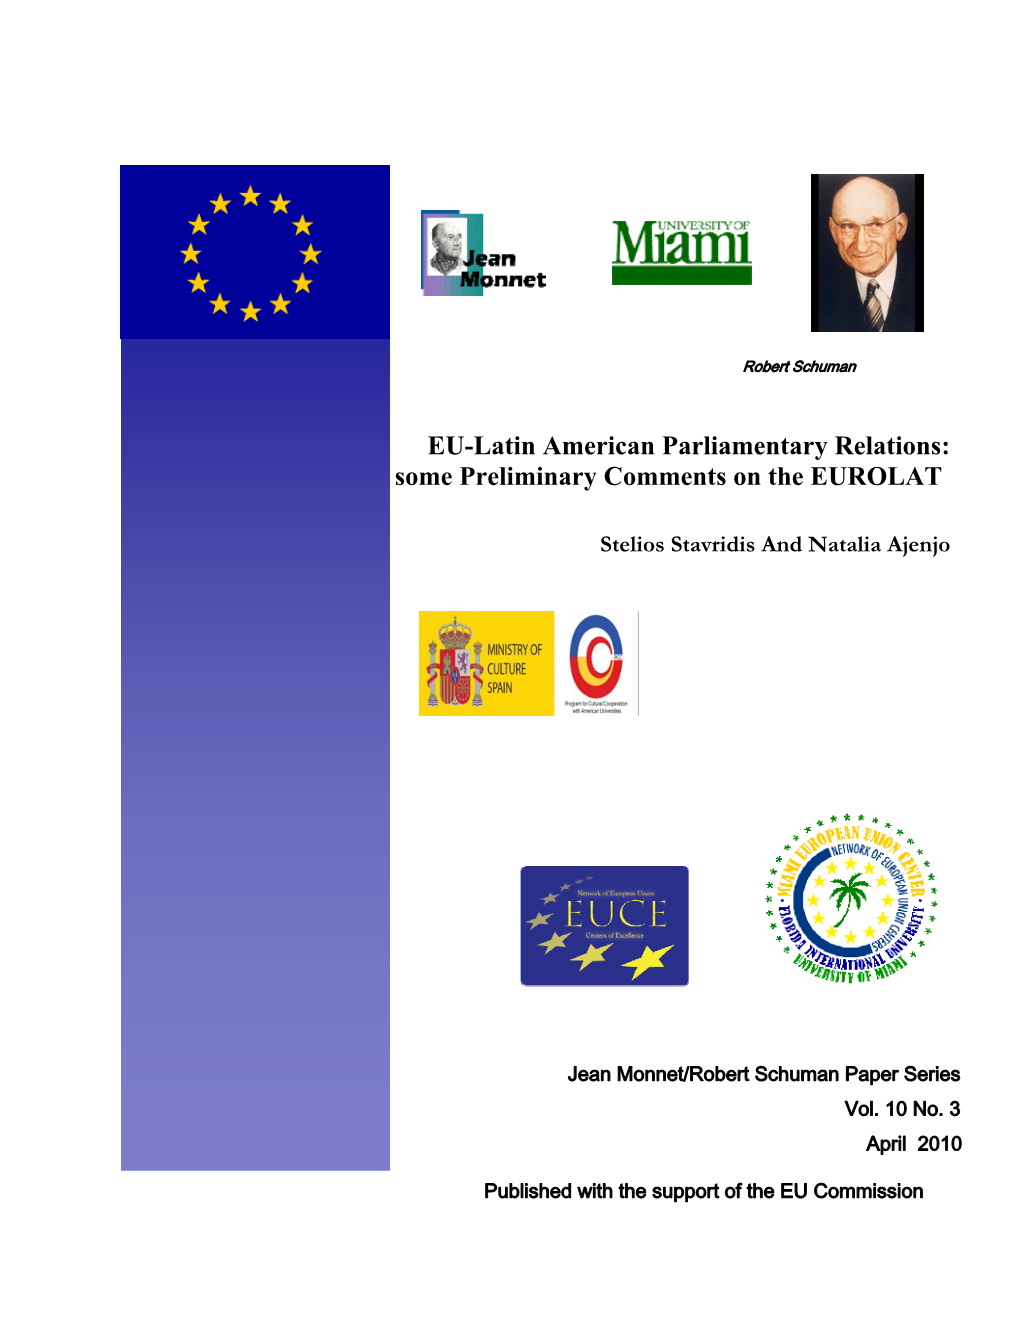 EU-Latin American Parliamentary Relations: Some Preliminary Comments on the EUROLAT